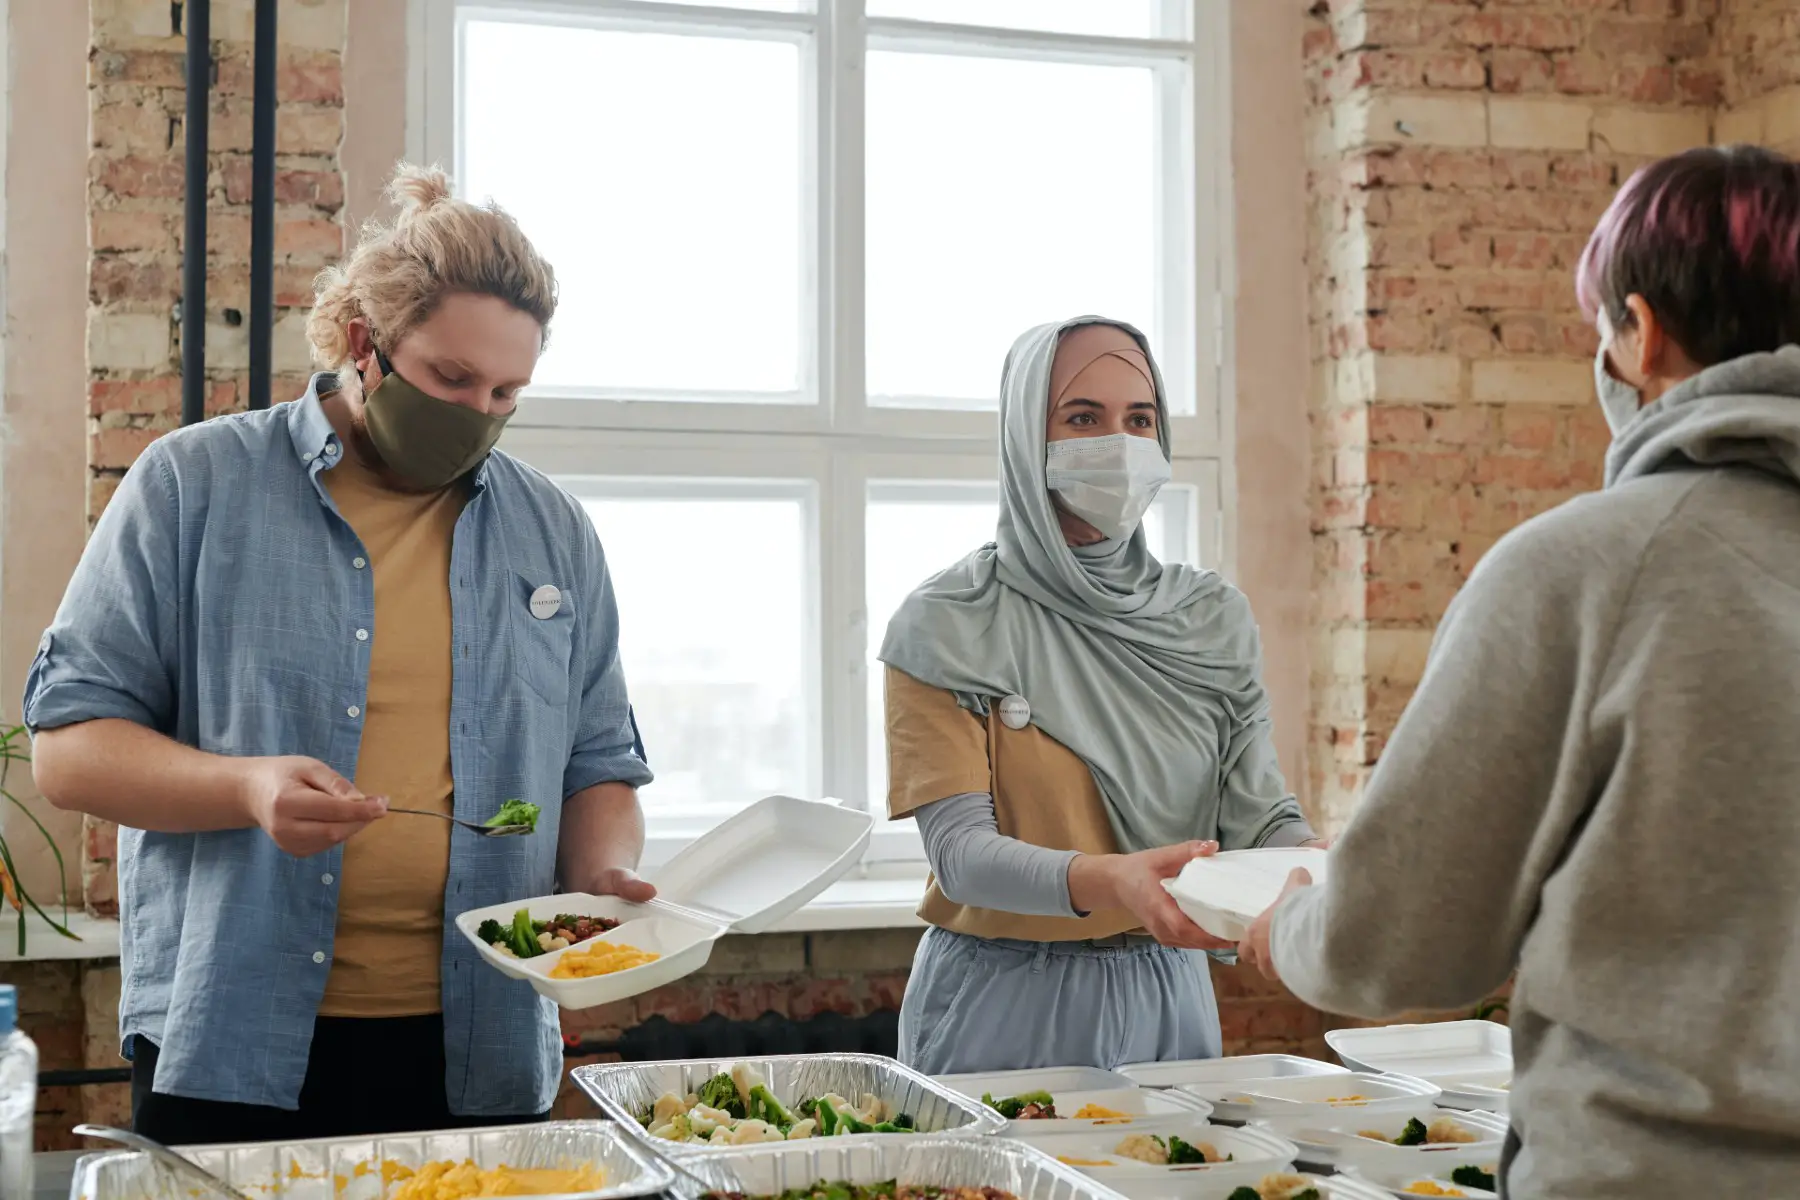 A person plating food in a plastic container, while a woman with a headscarf hands out food.